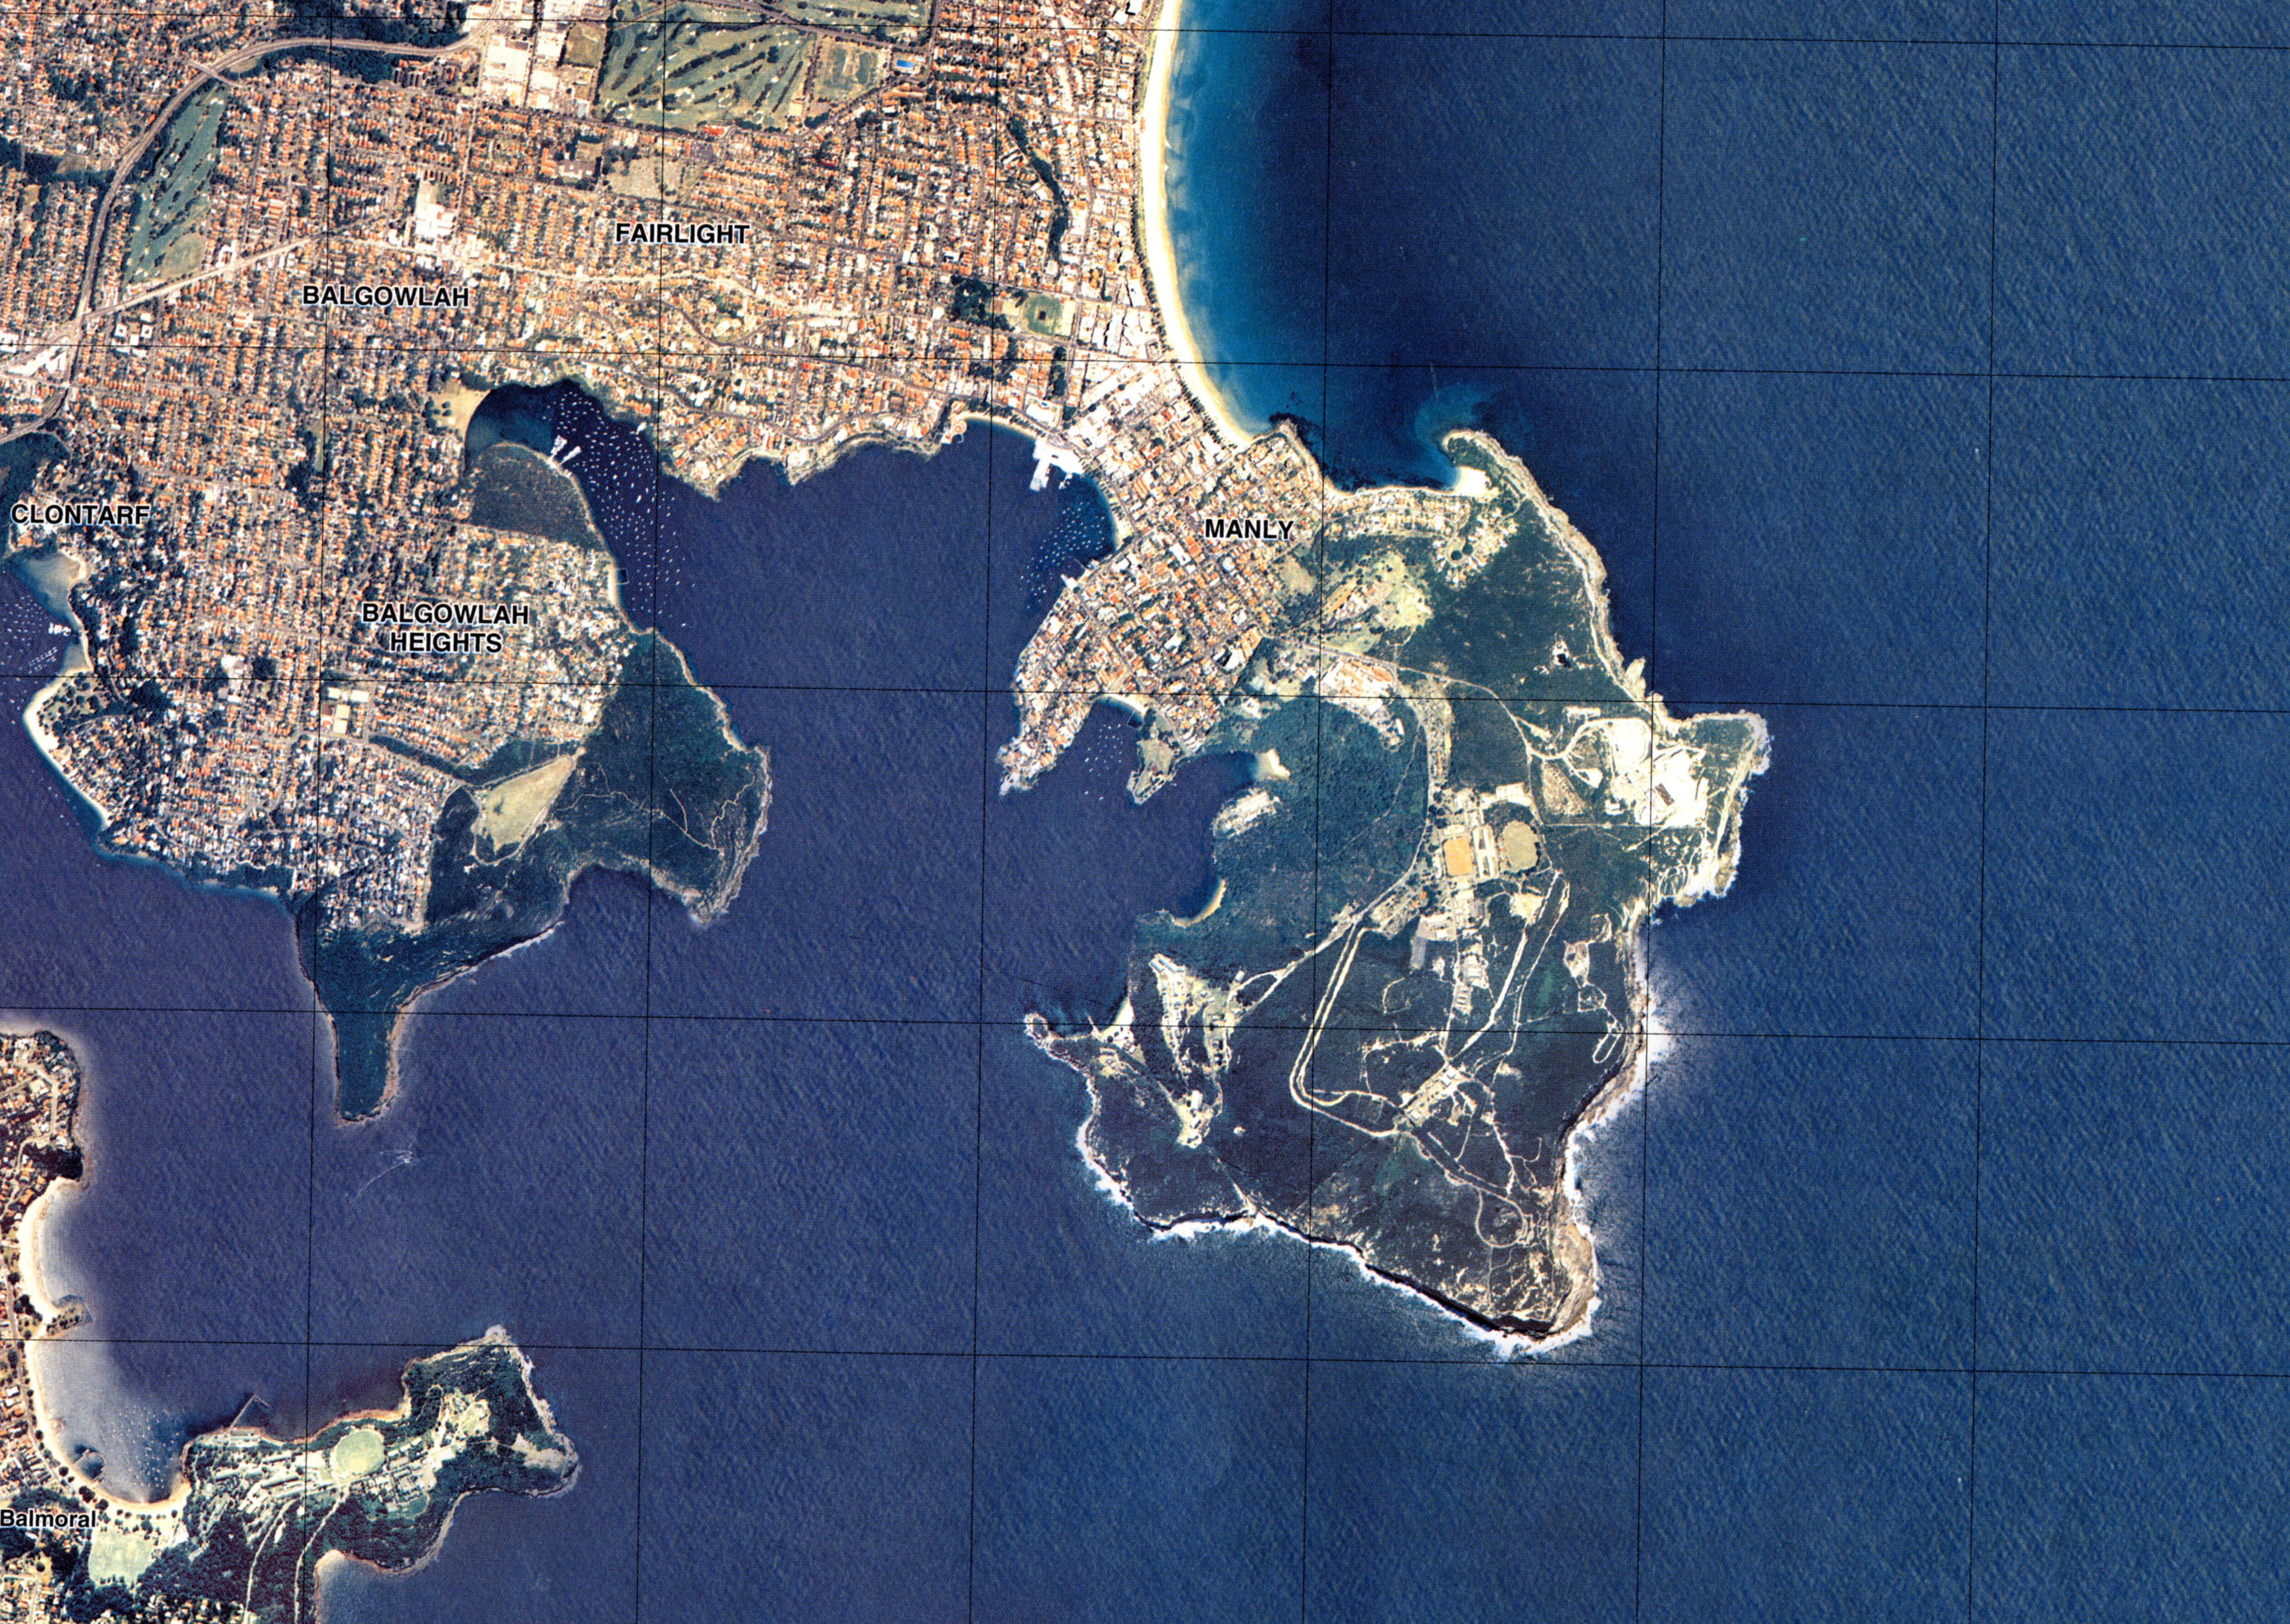 Satellite view of the Manly region within Sydney, NSW.